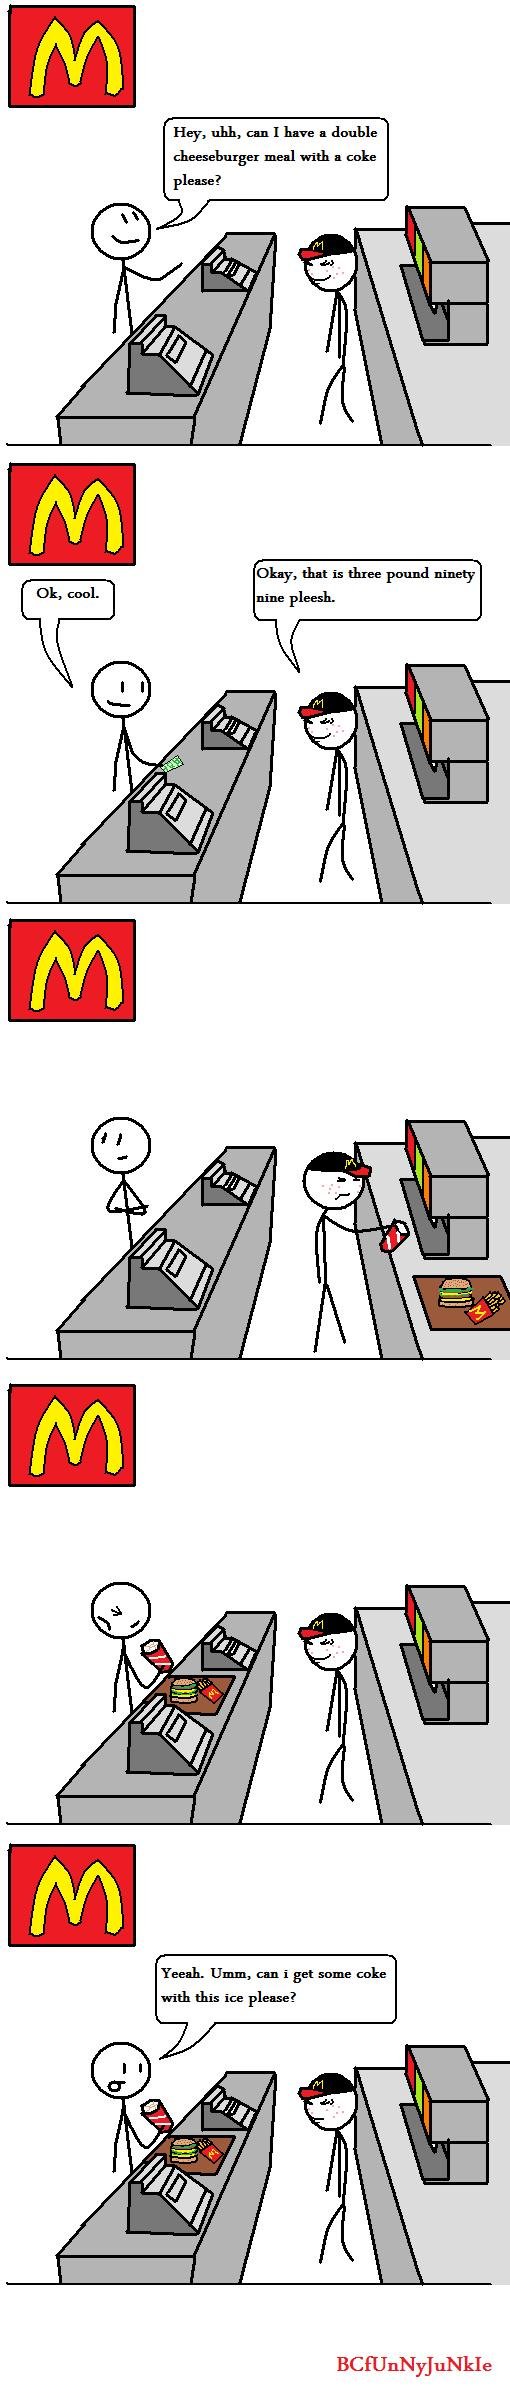 Typical McDonalds. Original comic. I hate it when this happens, you guys get this too?&lt;br /&gt; Edit OMG, Thanks guys, front page. This got waaaaay higher th